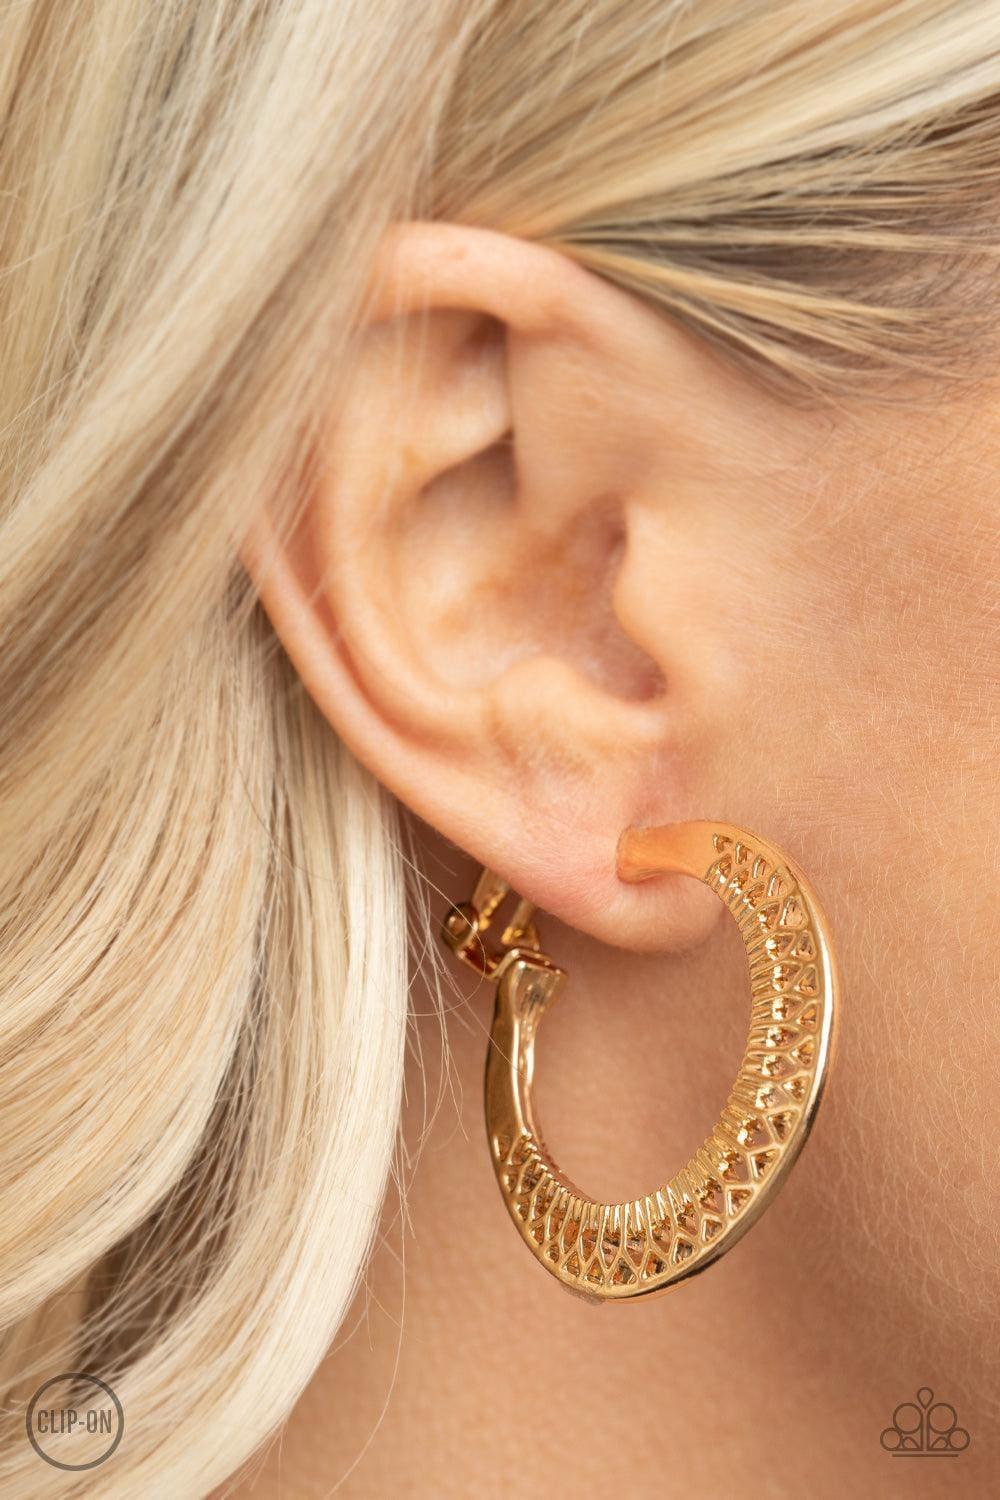 Paparazzi Accessories - Moon Child Charisma - Gold Clip-on Earrings - Bling by JessieK